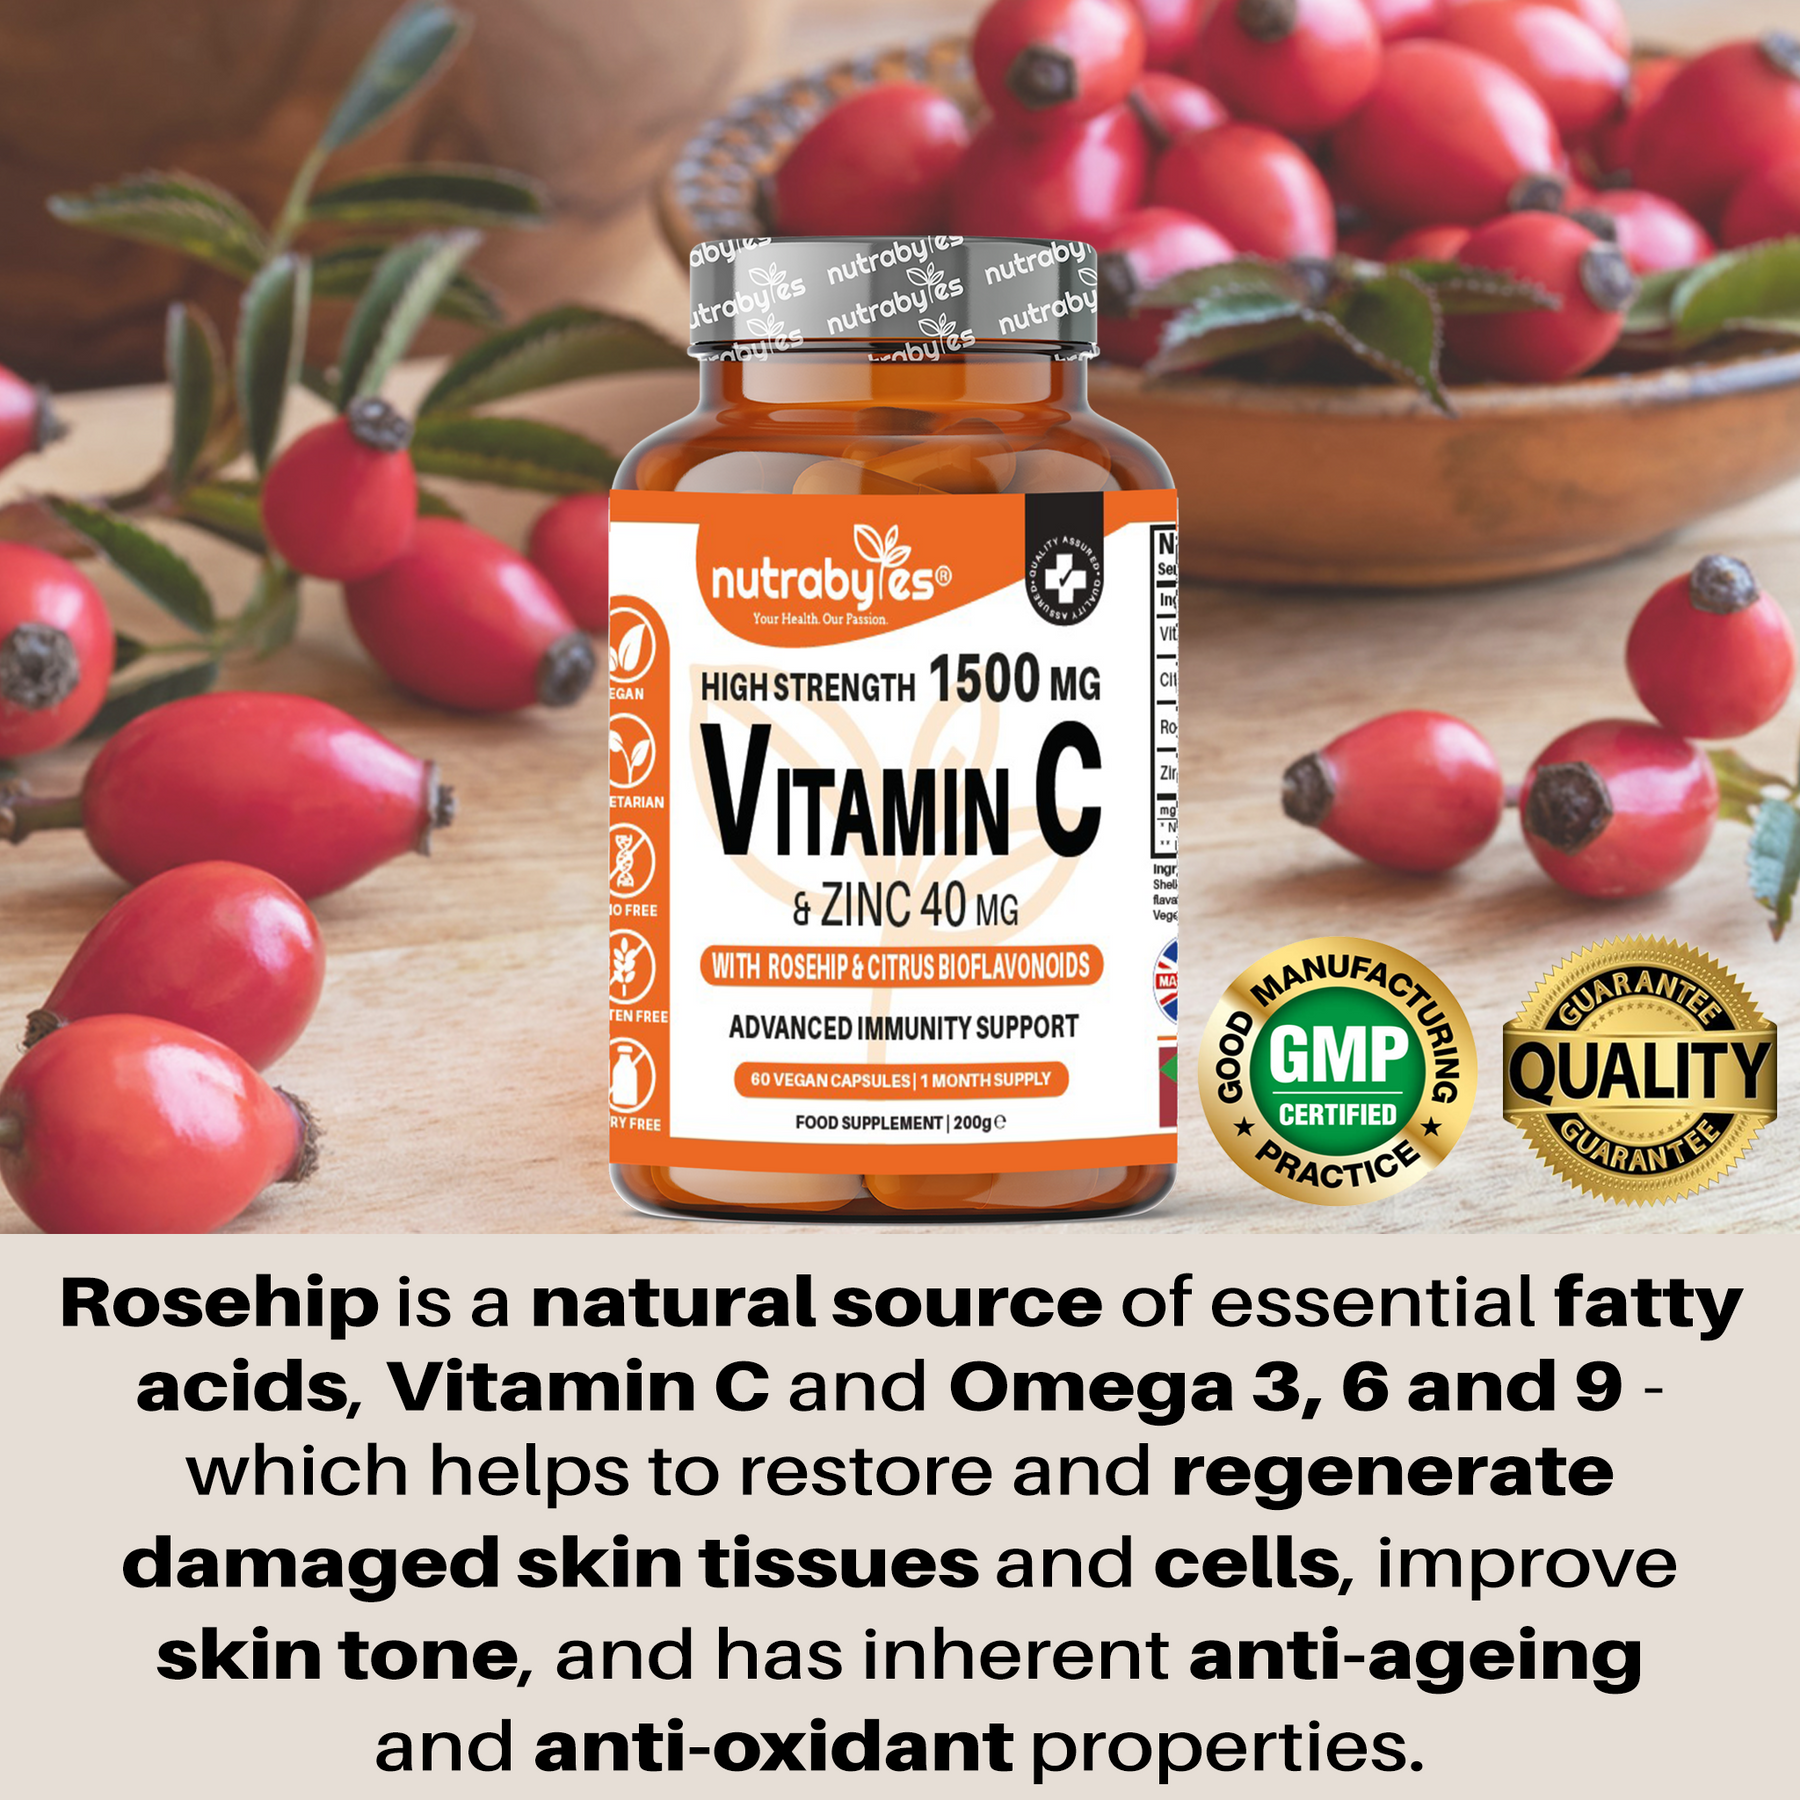 ﻿High-Strength Vitamin C and Zinc Capsules | Vitamin C 1500mg Zinc 40mg | Enhanced with Rose Hip and Citrus Bioflavonoids | 1 Month Supply | Made in the UK